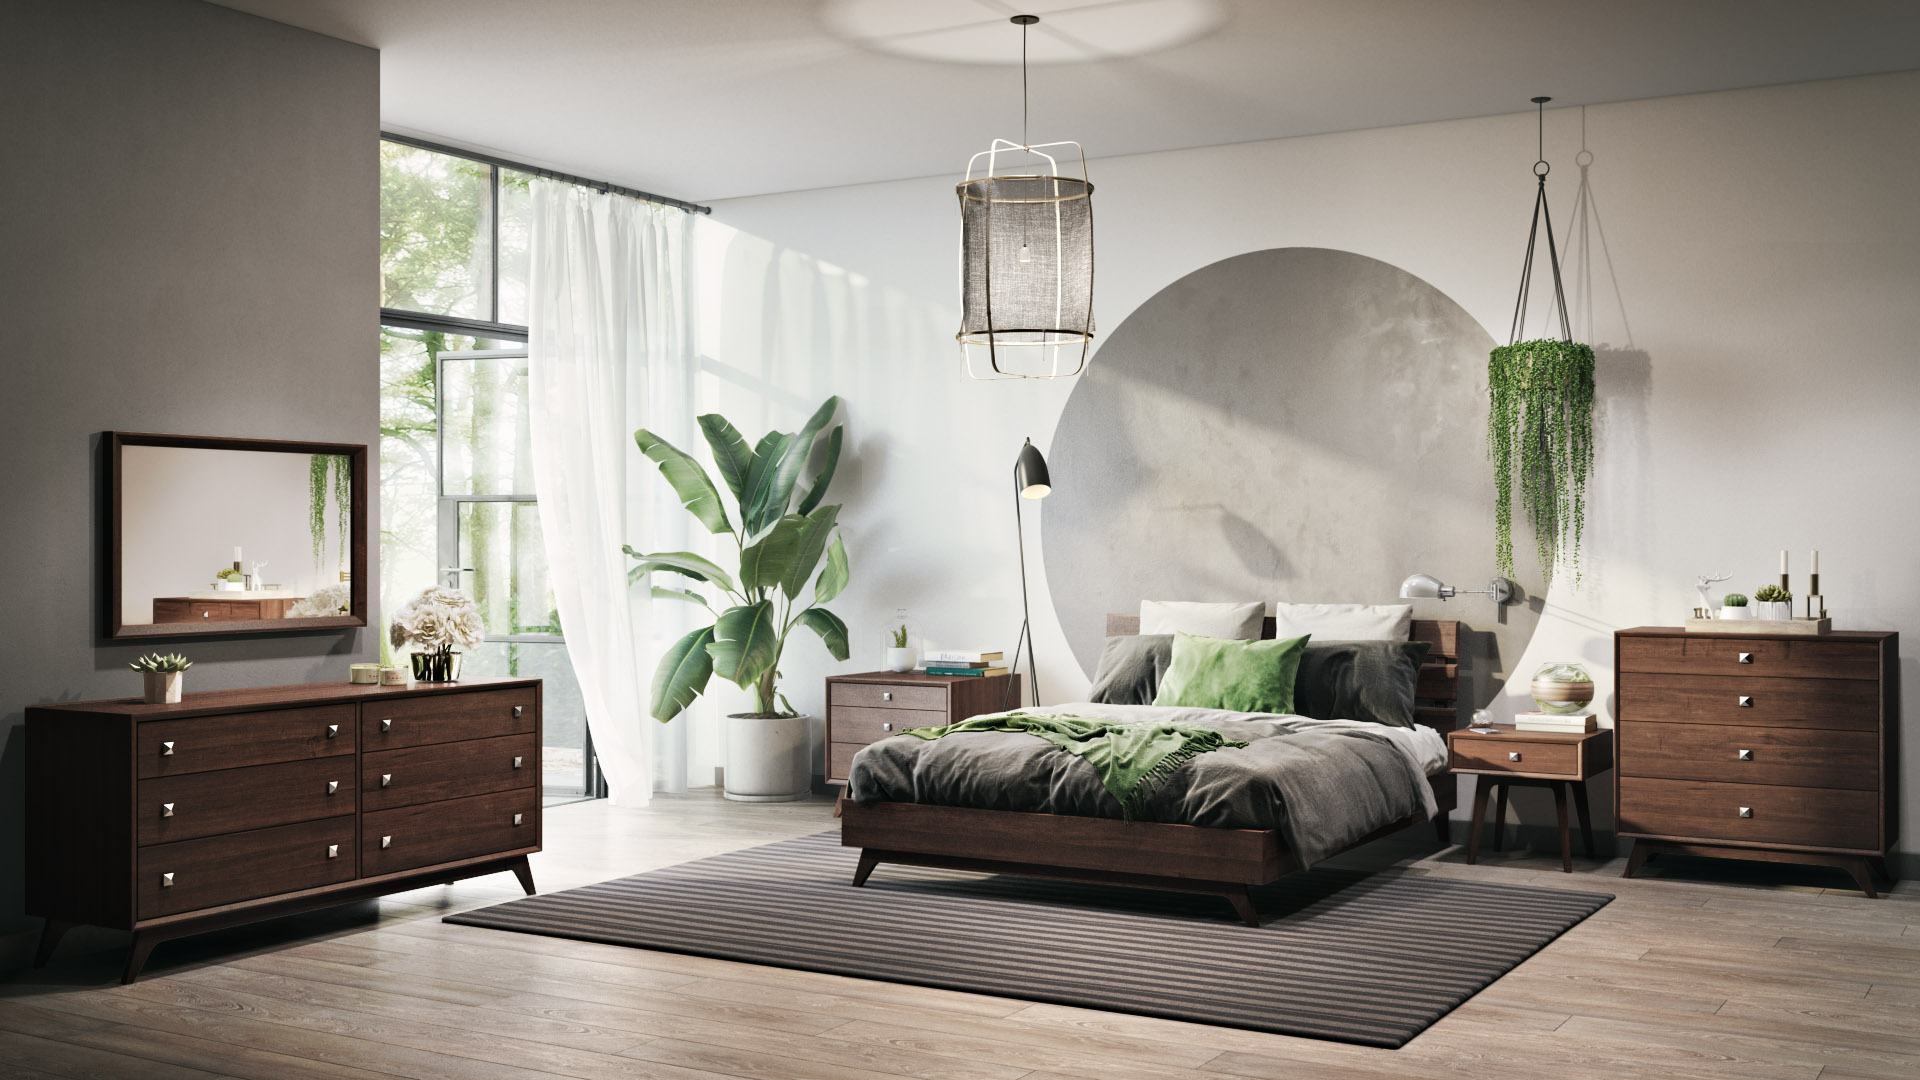 Photorealistic Lifestyle for Bedroom Furniture Advertising